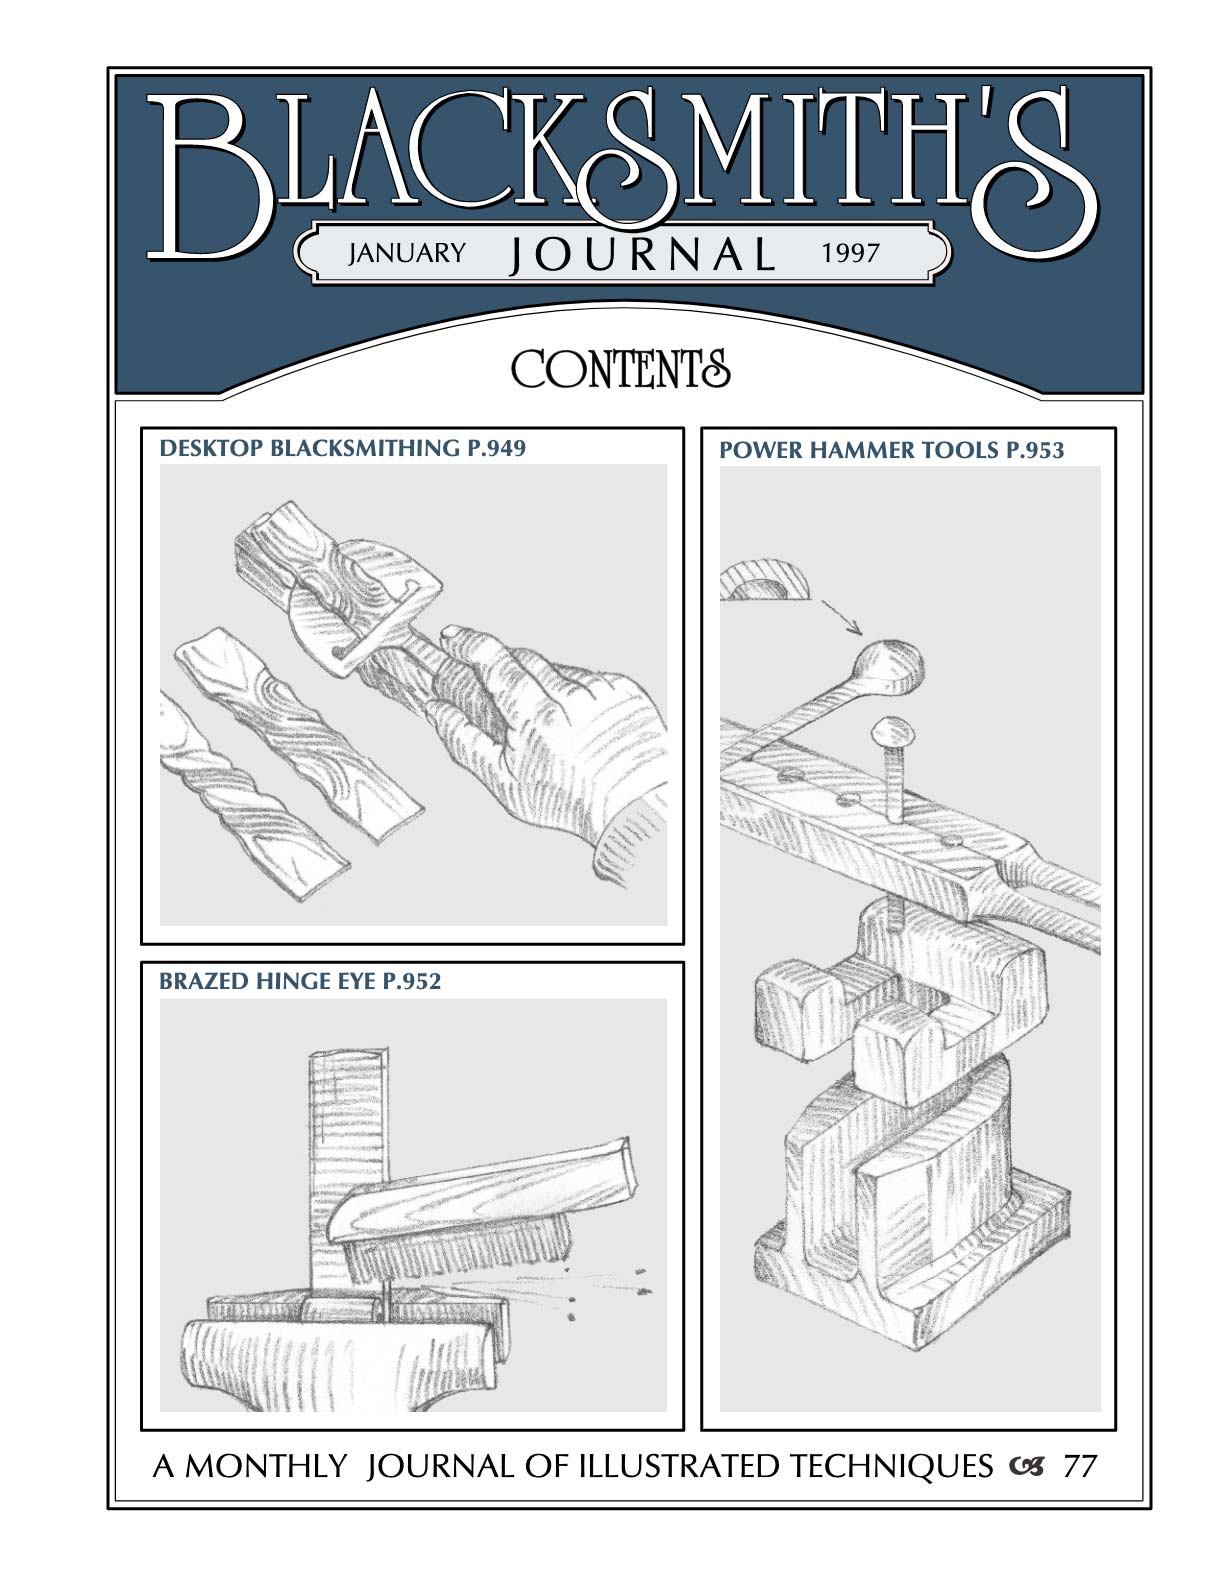 Cover image of Blacksmith's Journal with desktop smithing article.